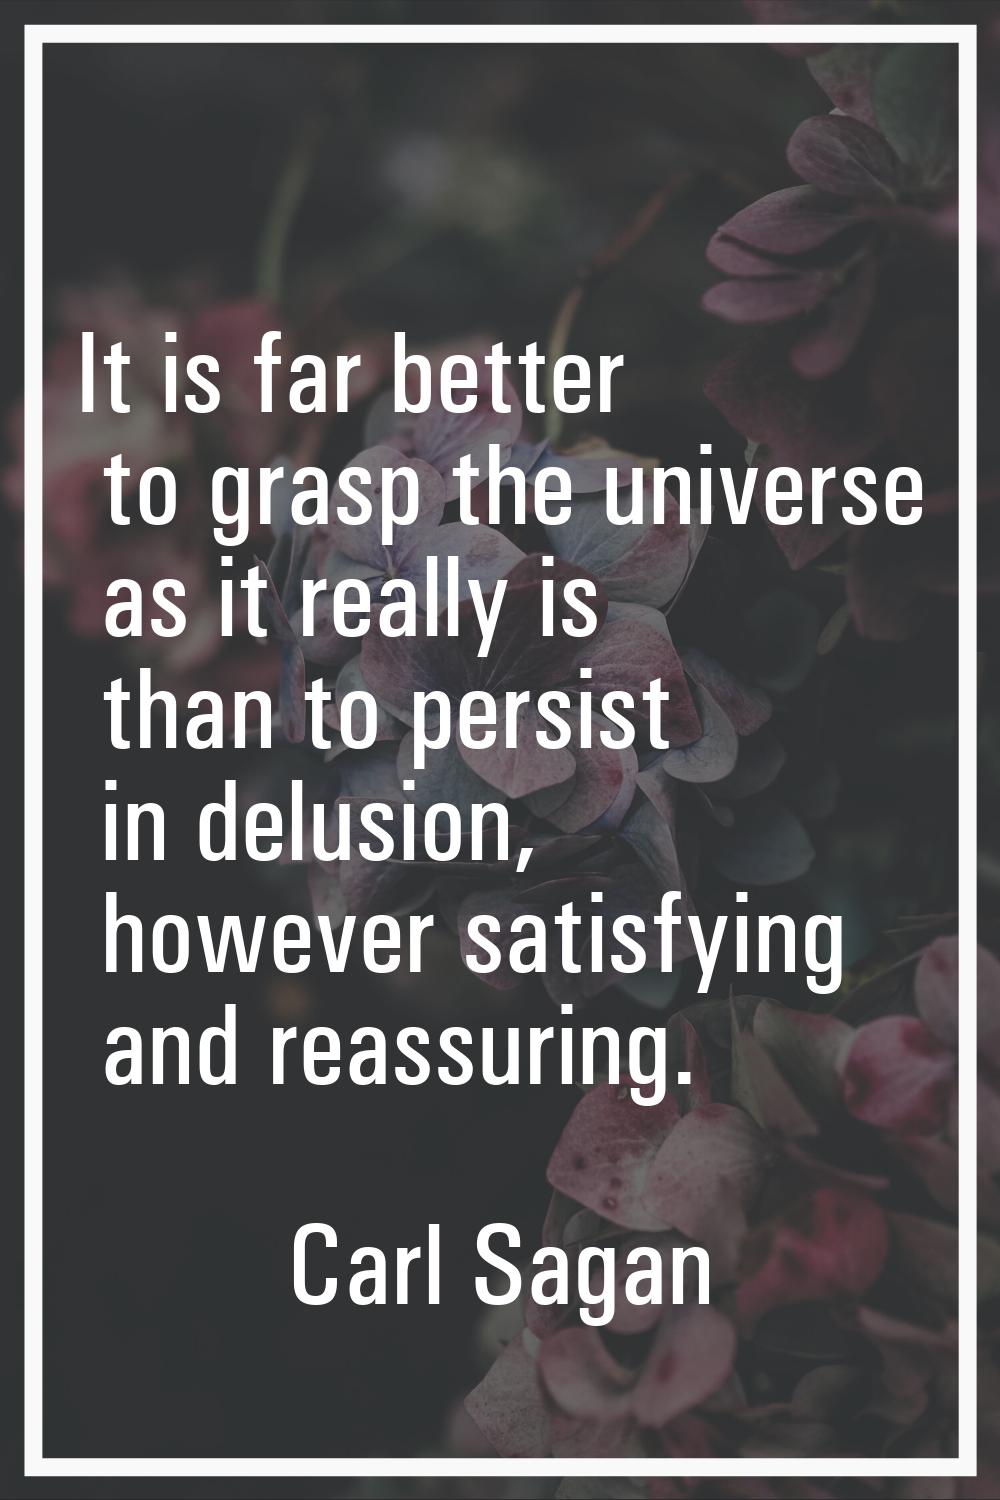 It is far better to grasp the universe as it really is than to persist in delusion, however satisfy